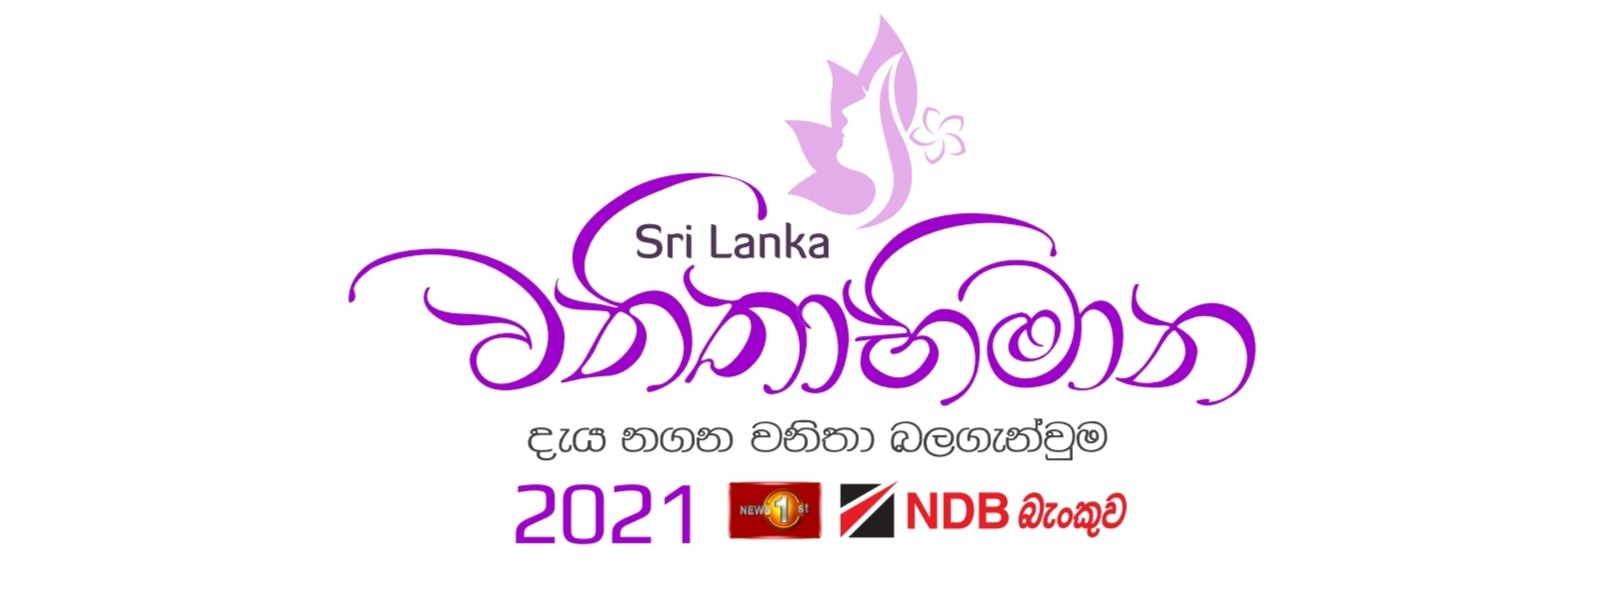 Sri Lanka Vanithaabhimana Launches for the 2nd Consecutive Year